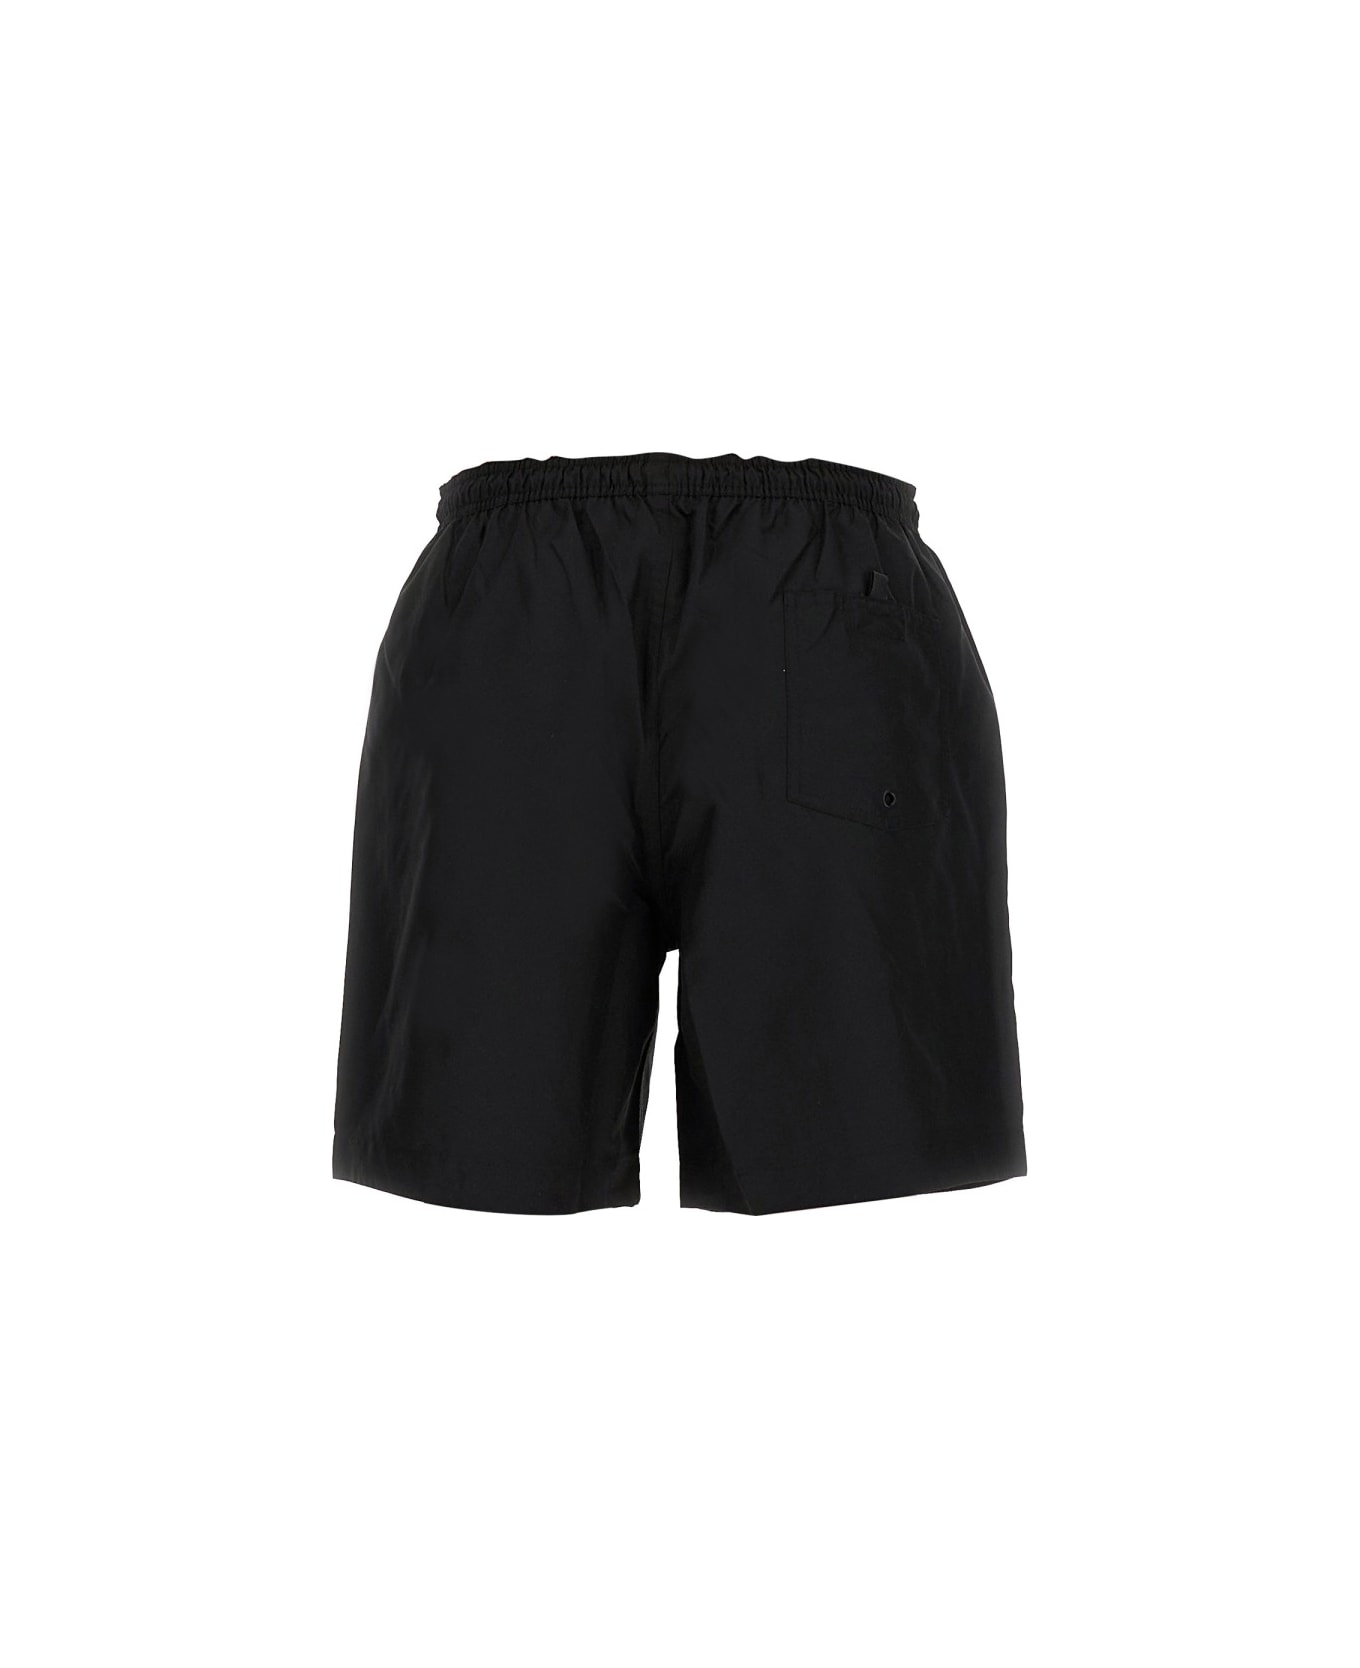 Fred Perry Swimsuit - BLACK 水着